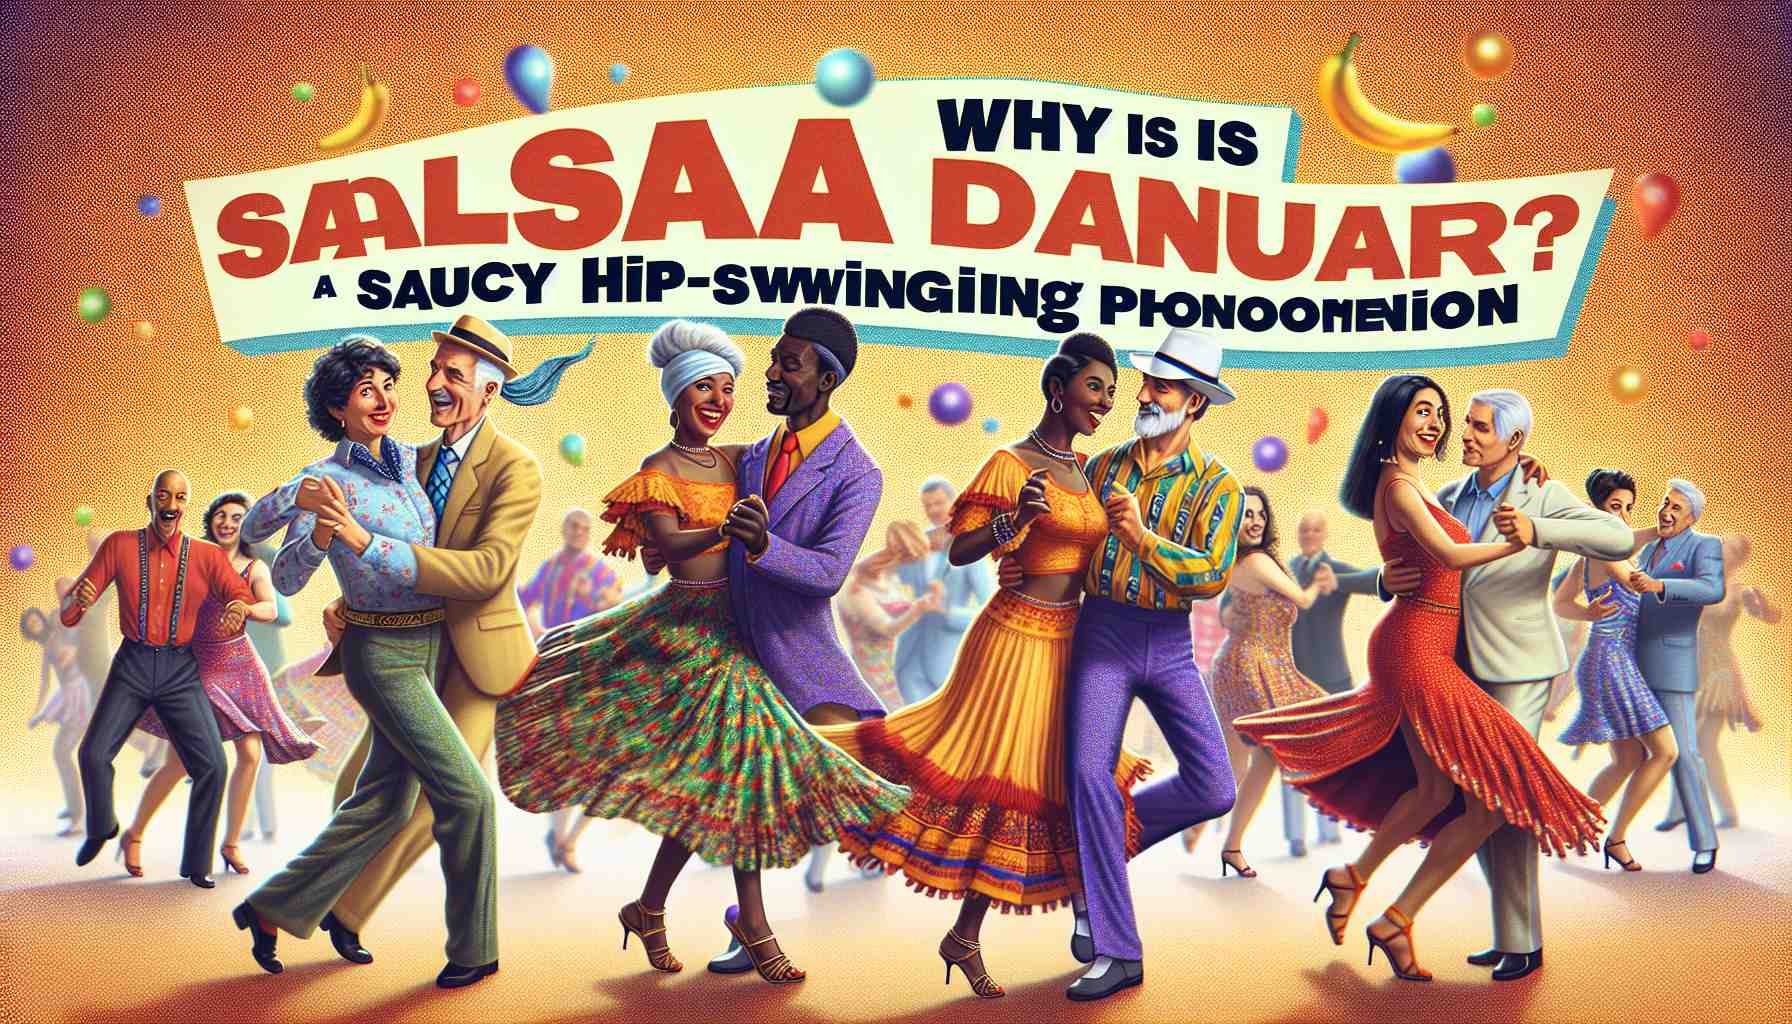 Discover why salsa dance is the foot-tapping cure for quarantine blues and the shuffling secret to shaking off the pandemic cobwebs. Get ready to salsa!